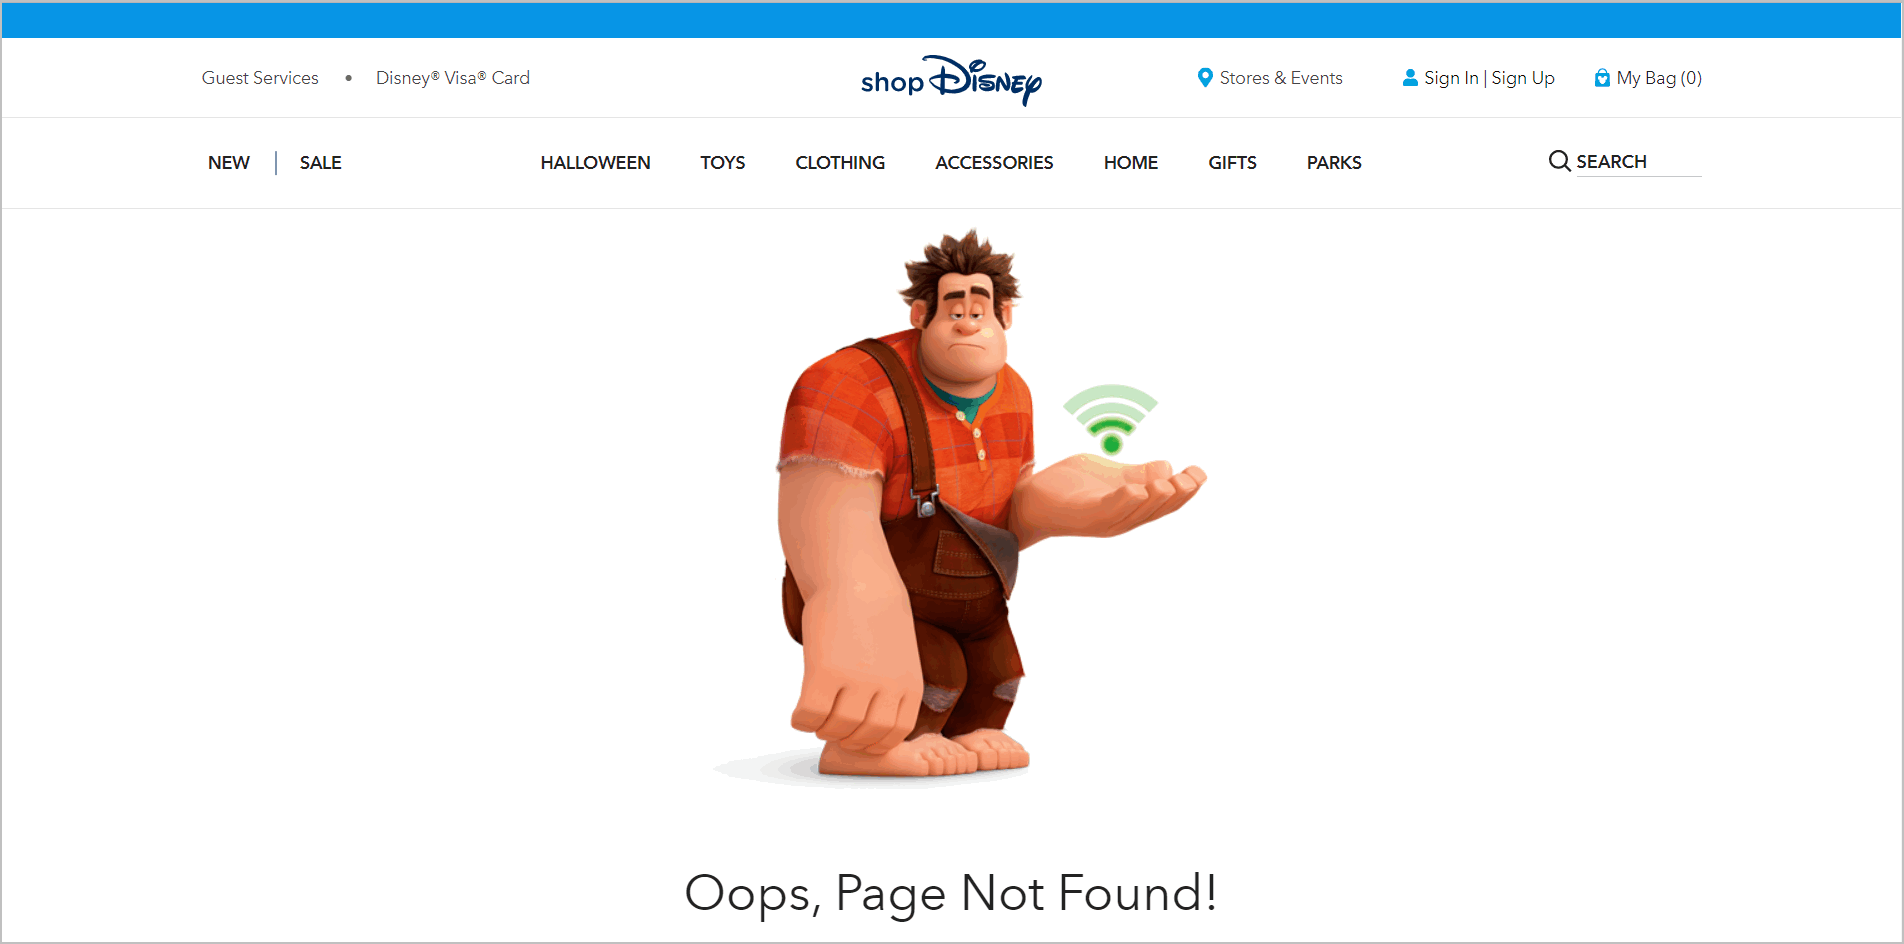 cute ecommerce 404 page design example - shopdisney.com's error page with a photo of Wreck-It-Ralph and a message that says "Oops, Page Not Found!"